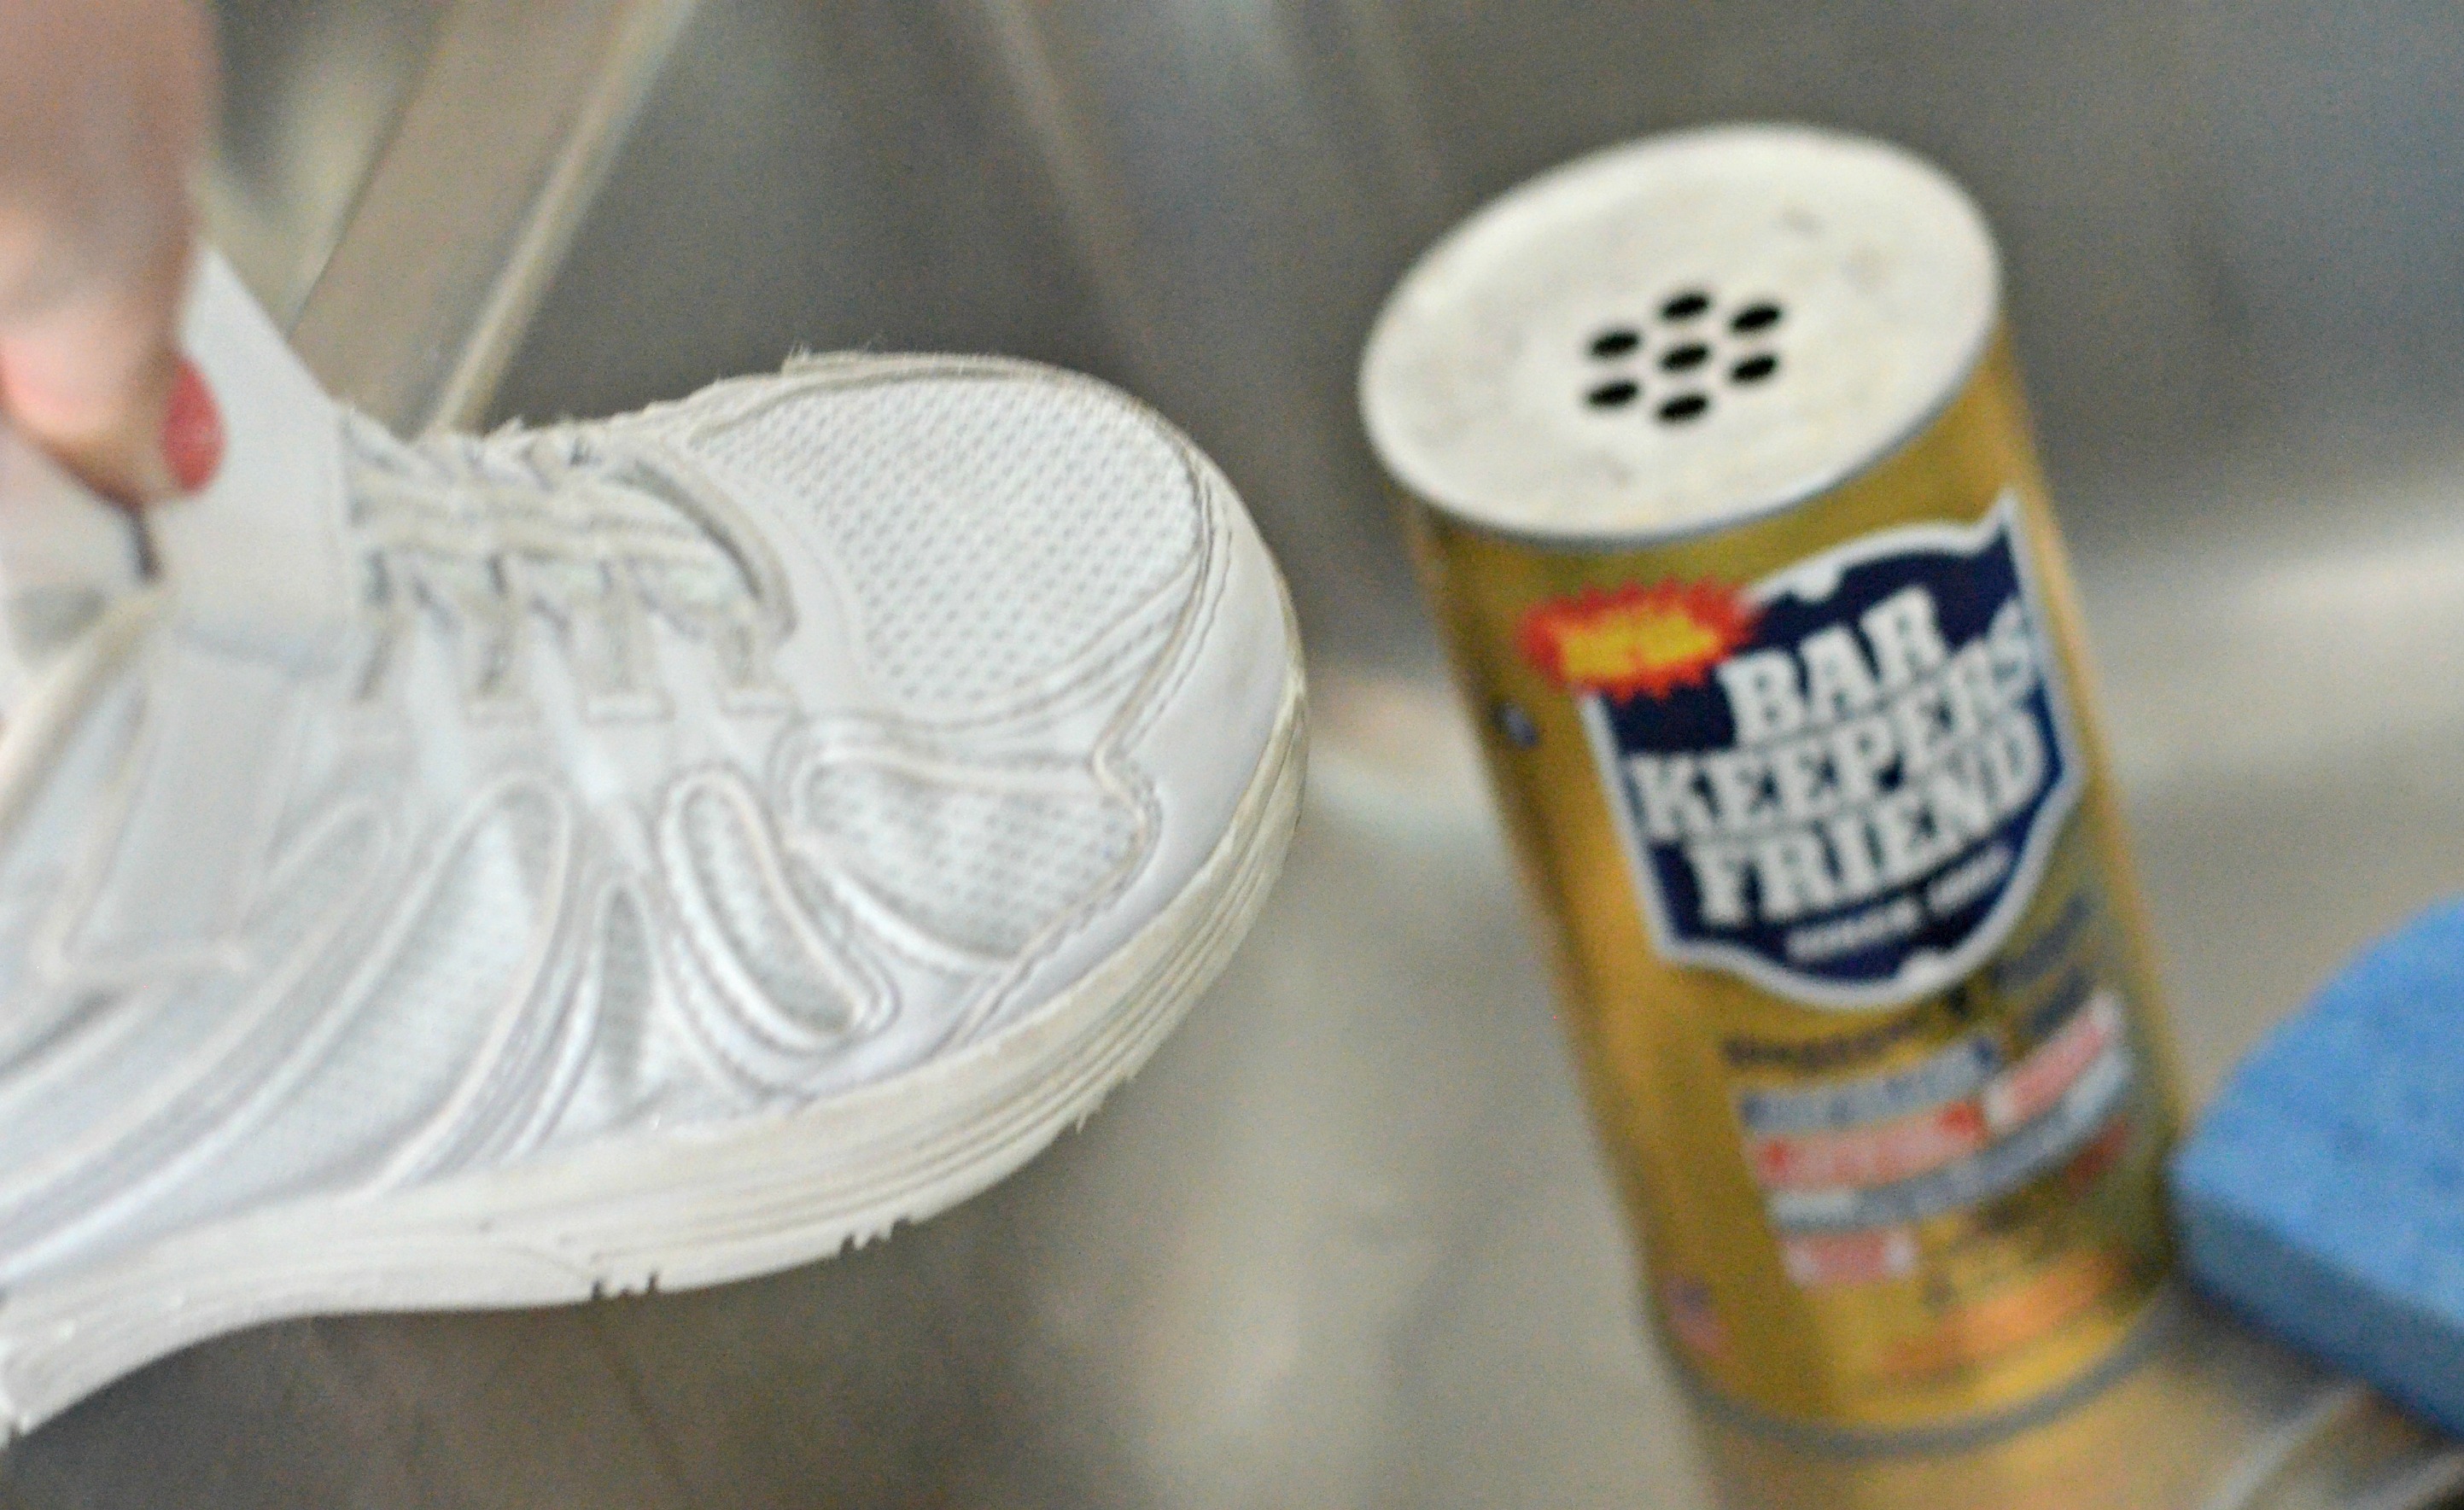 Bar Keepers Friend nest to a white sneaker